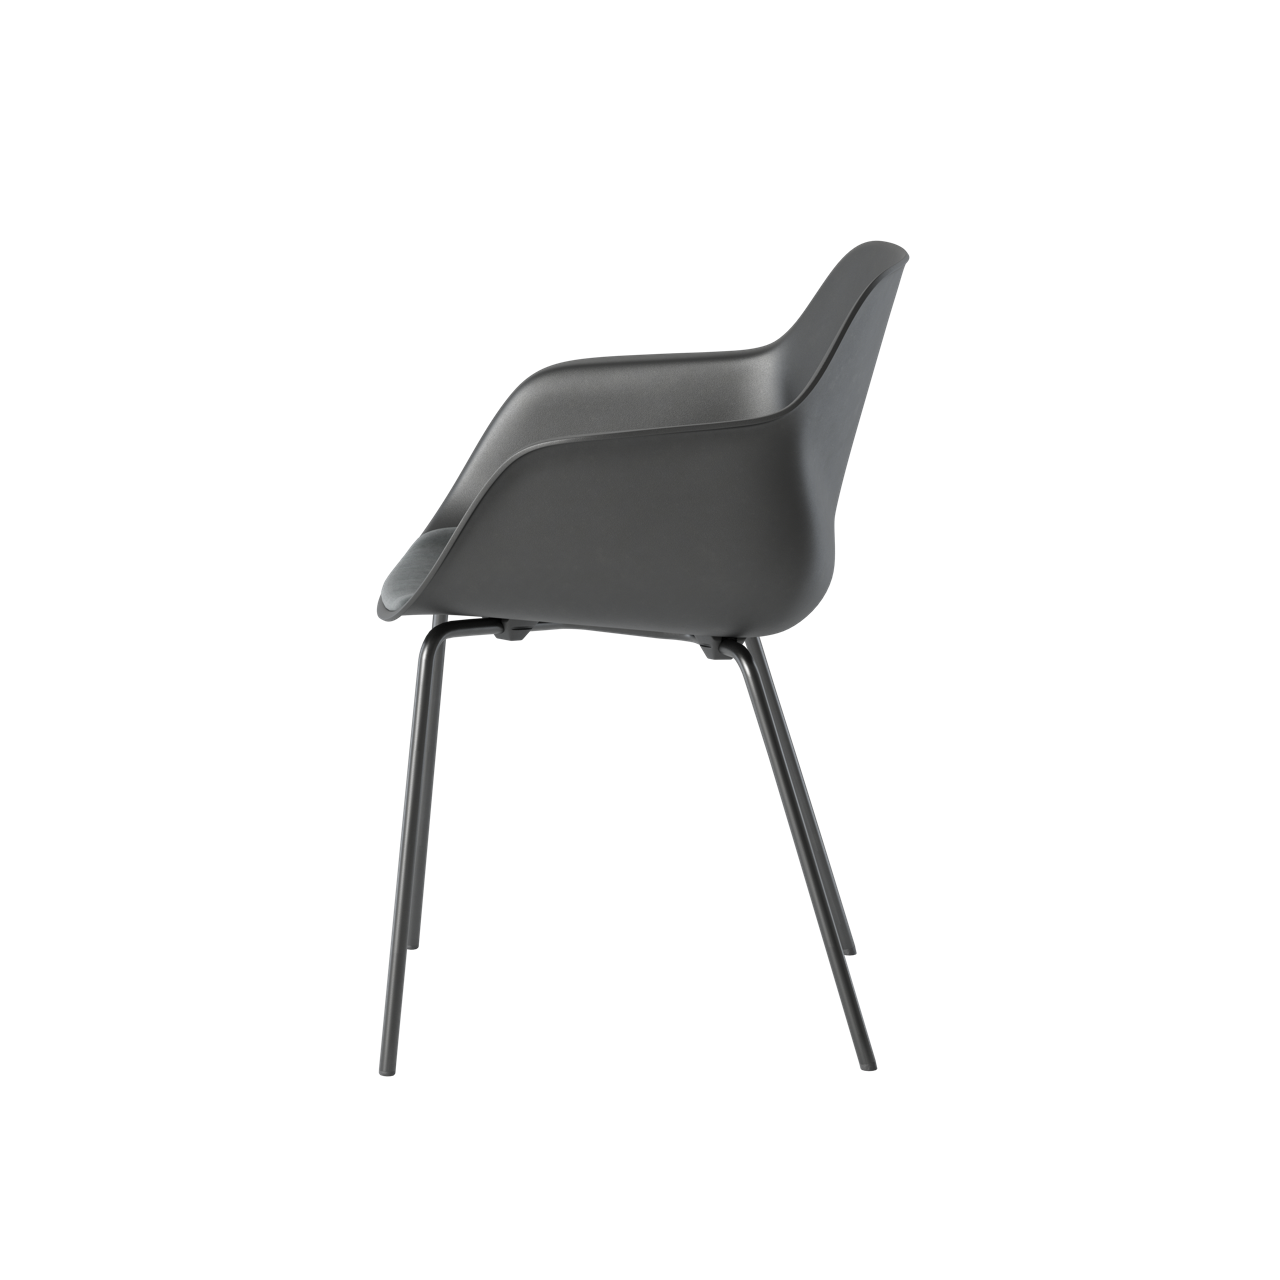 OCEE&FOUR – Chairs – FourMe 44 – Plastic shell - Seat Pad - Packshot Image 2 Large